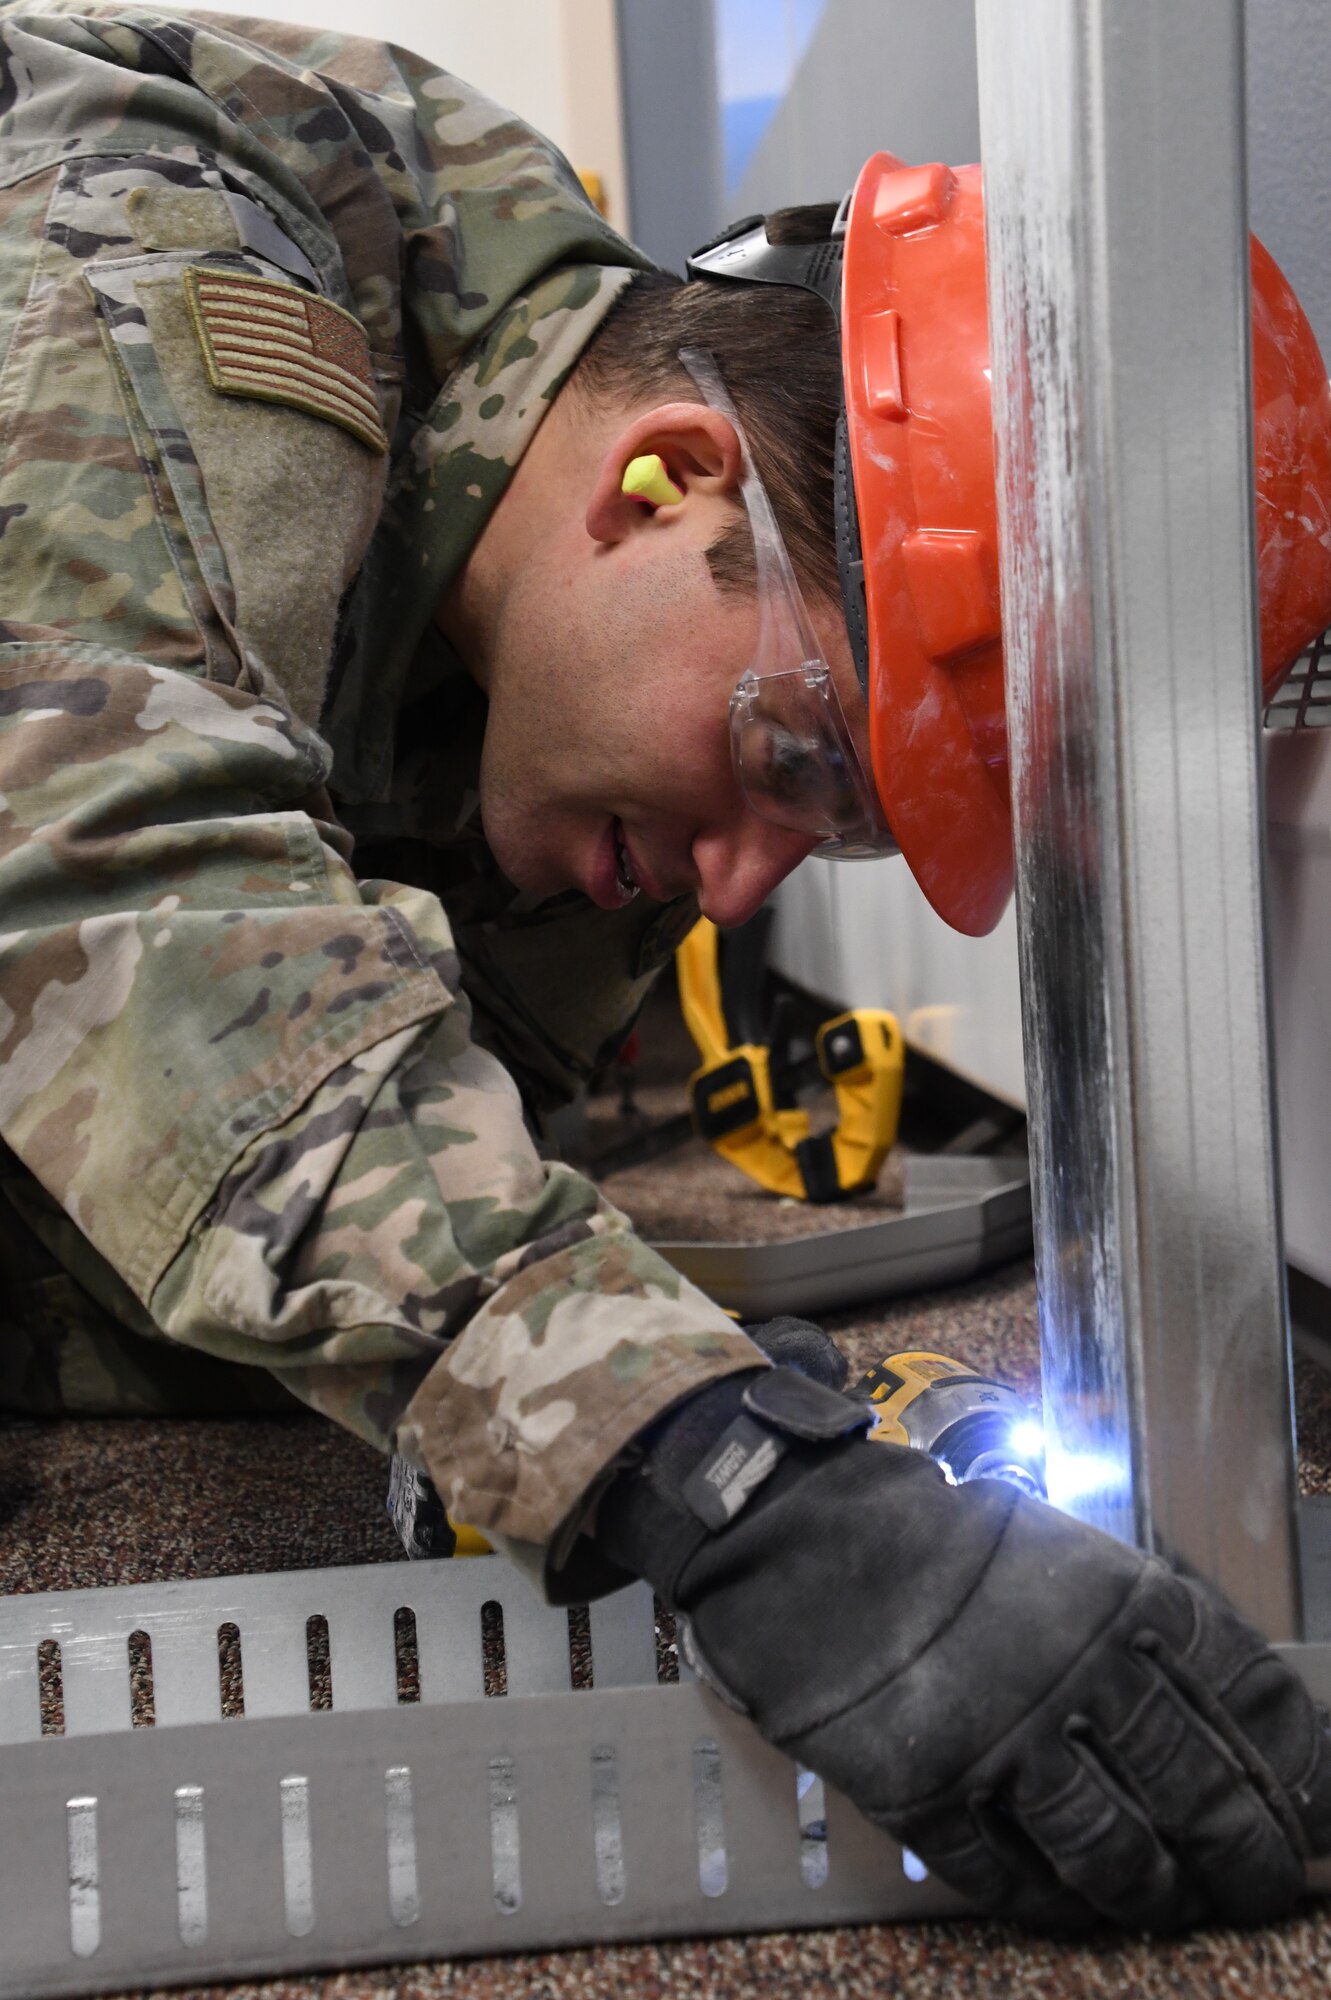 Airman 1st Class Evan Offie is a structural journeyman in the 168th Wing Civil Engineering Squadron, learning the trade and serving in the Air National Guard. (U.S. Air National Guard photo by Senior Master Sgt. Julie Avey)